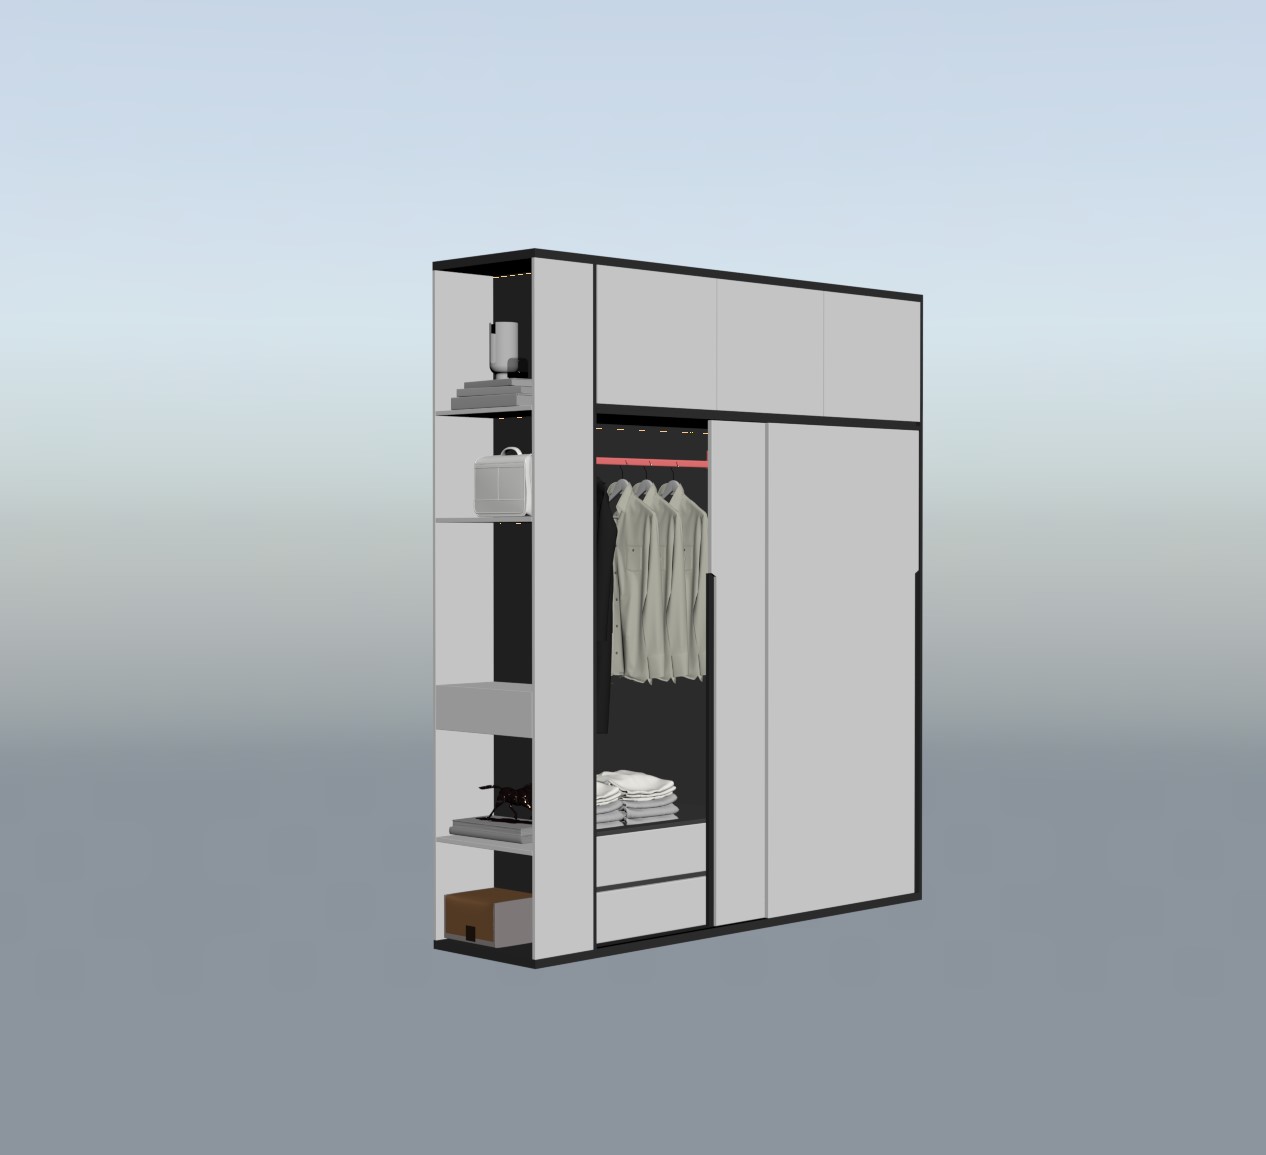 9780. 3D Wardrobe Model For Free Download by An Ngoc